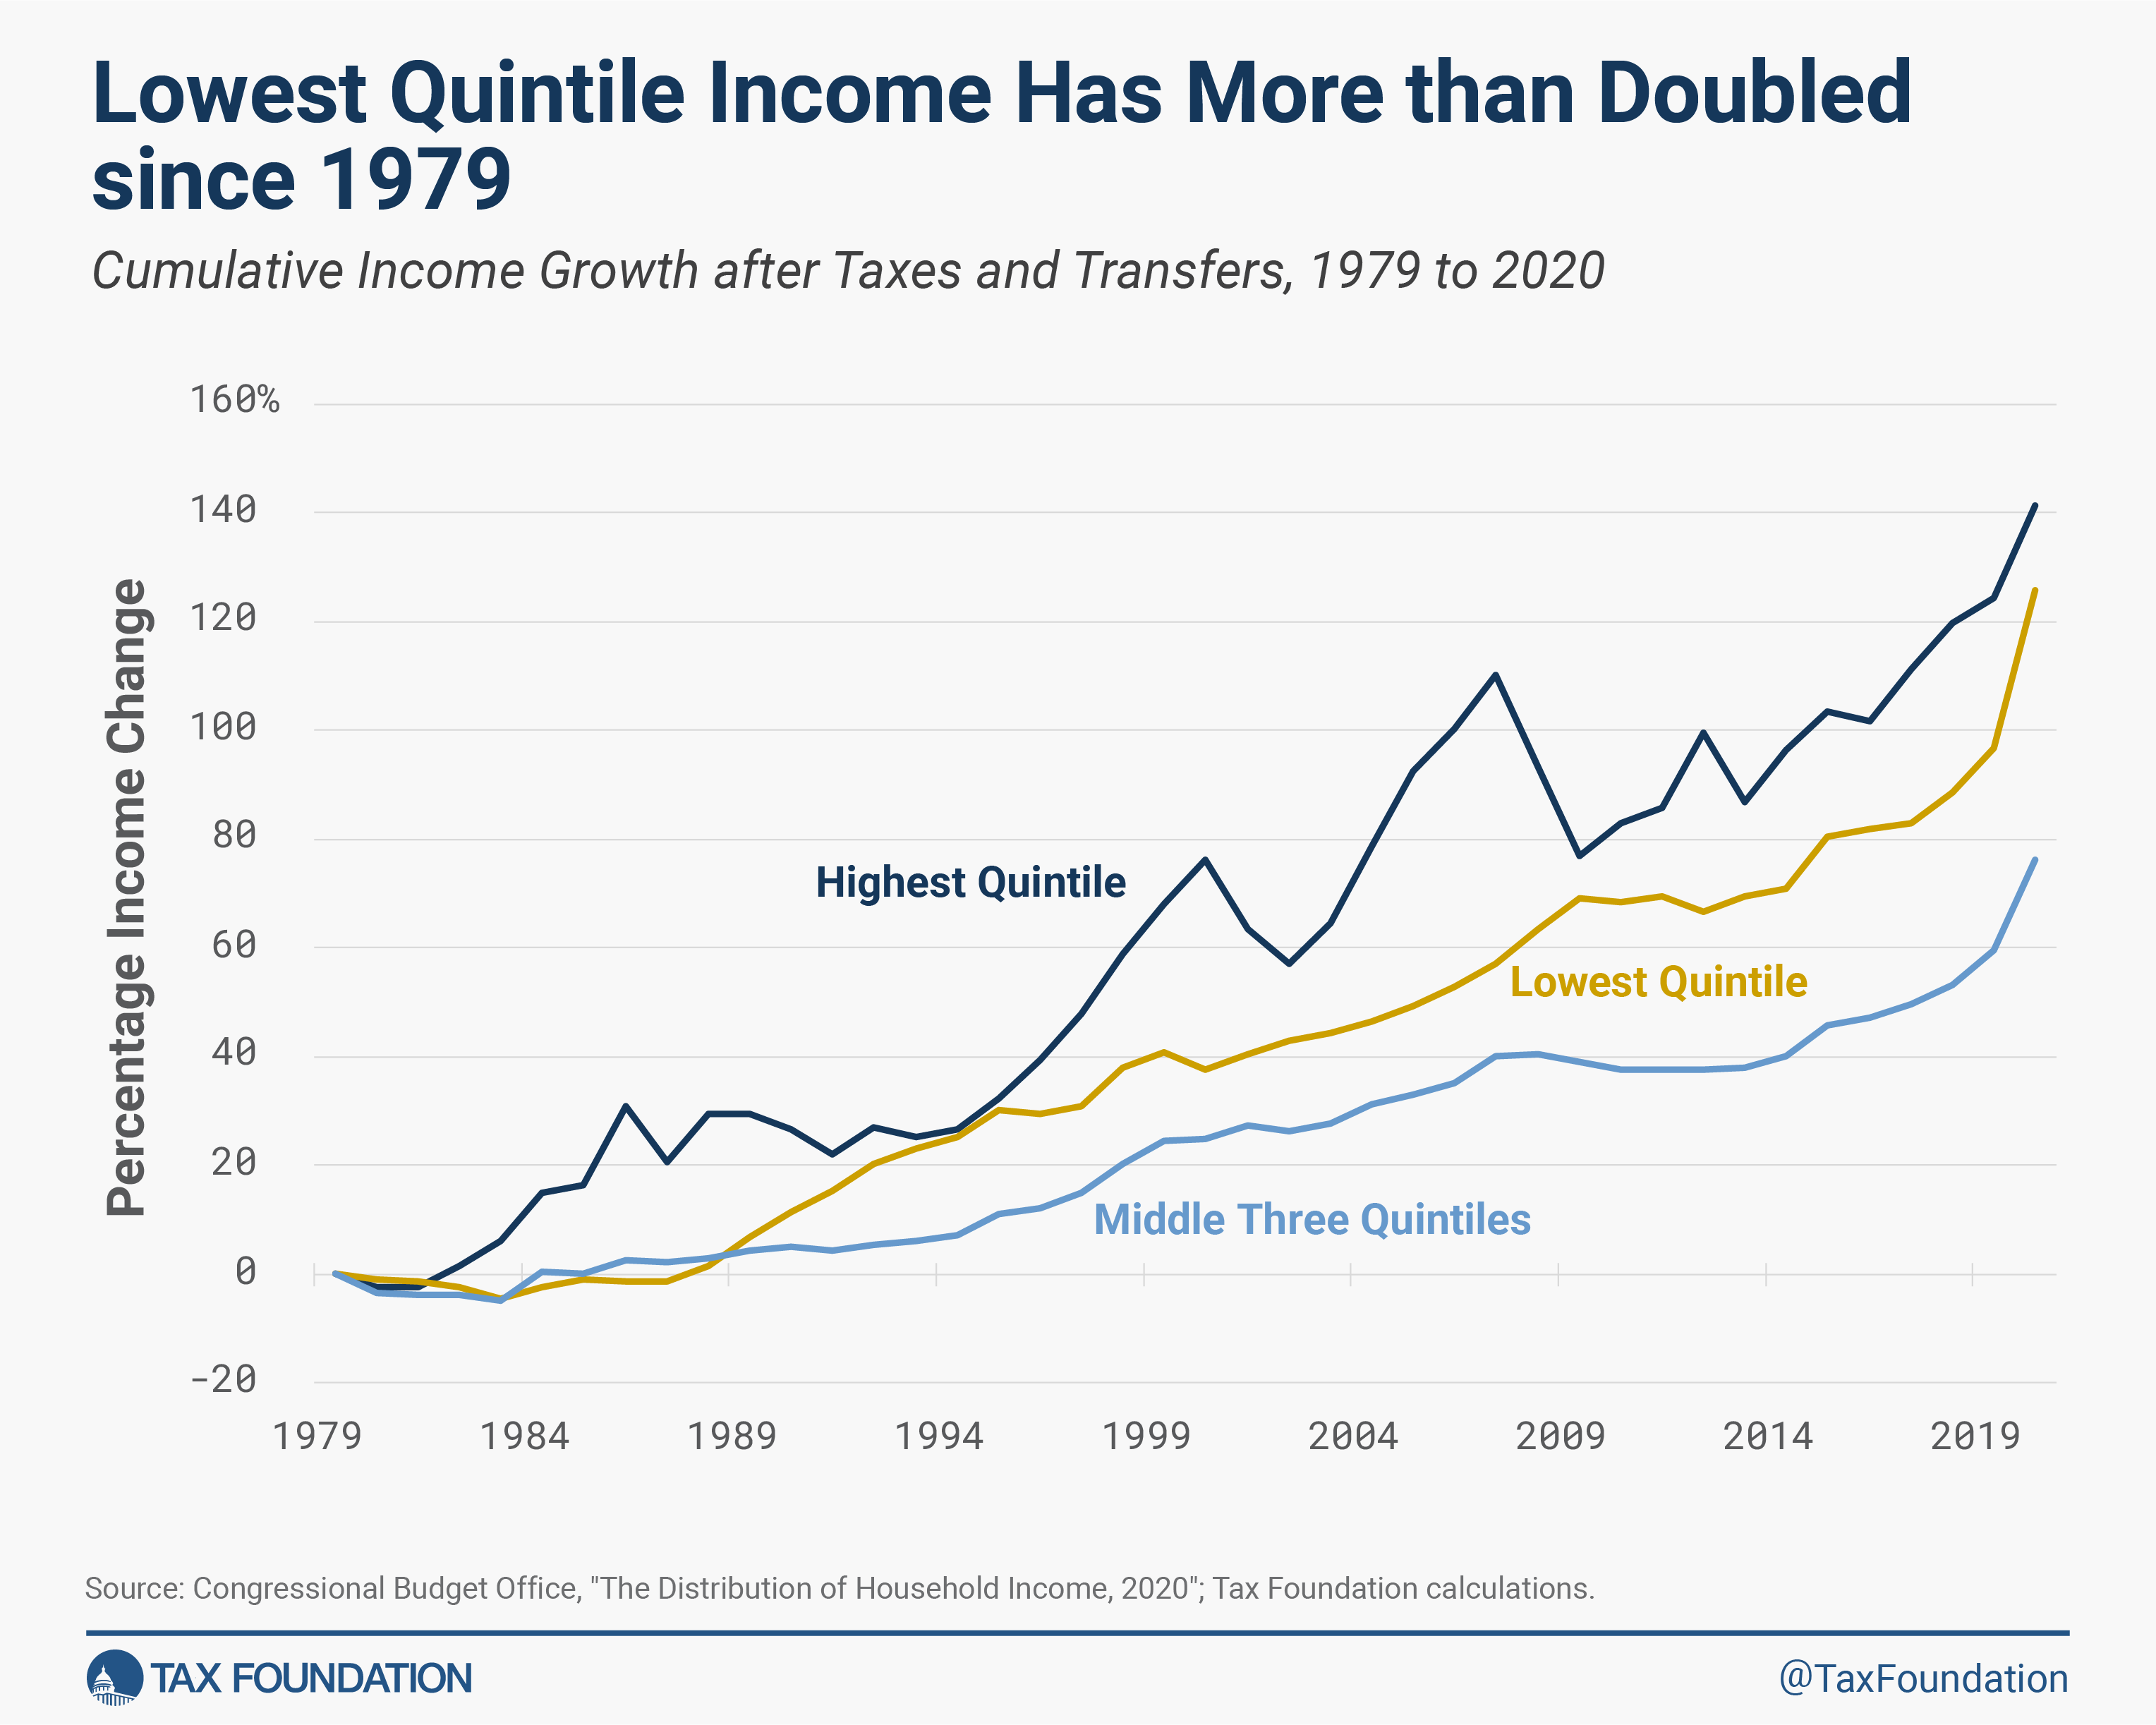 US income growth after federal taxes and transfers data